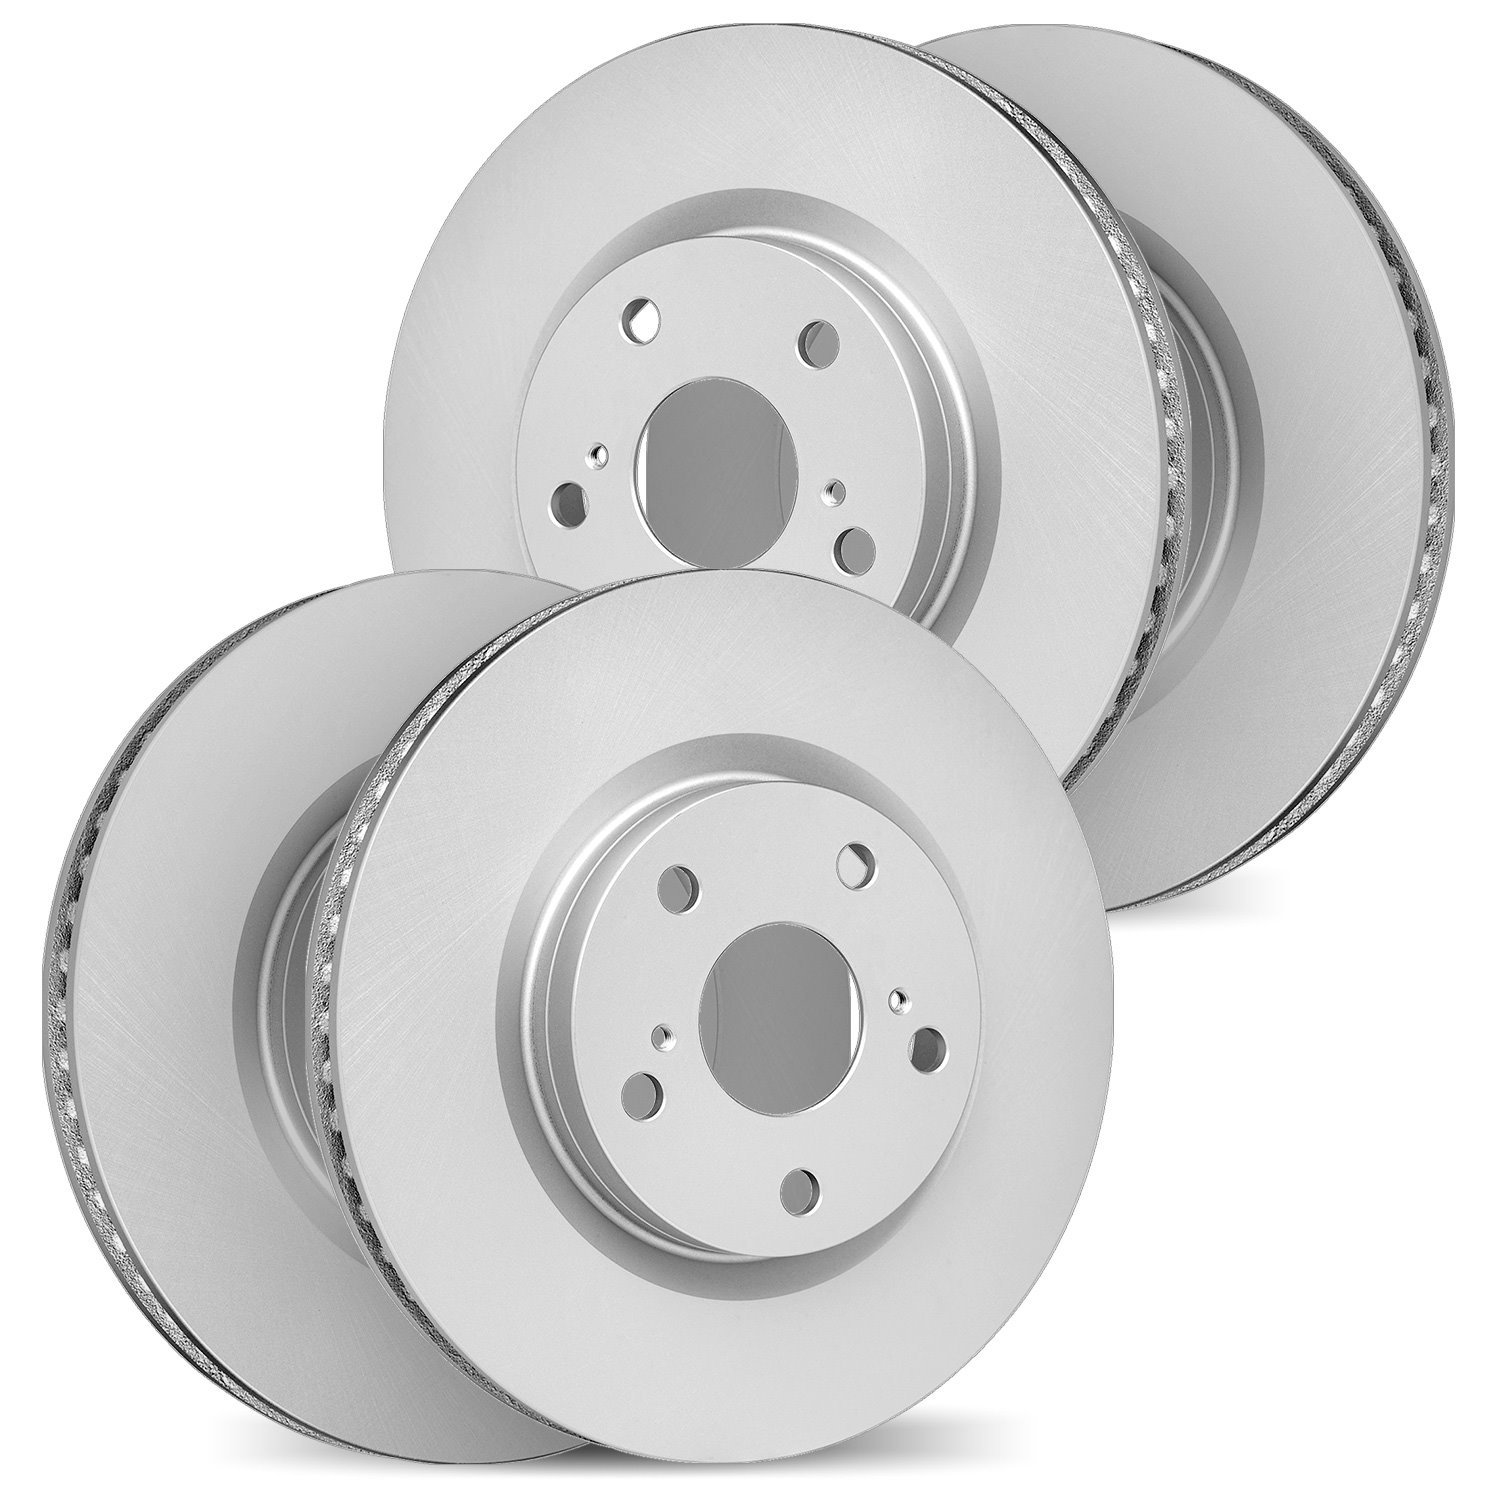 4004-68003 Geospec Brake Rotors, Fits Select Infiniti/Nissan, Position: Front and Rear